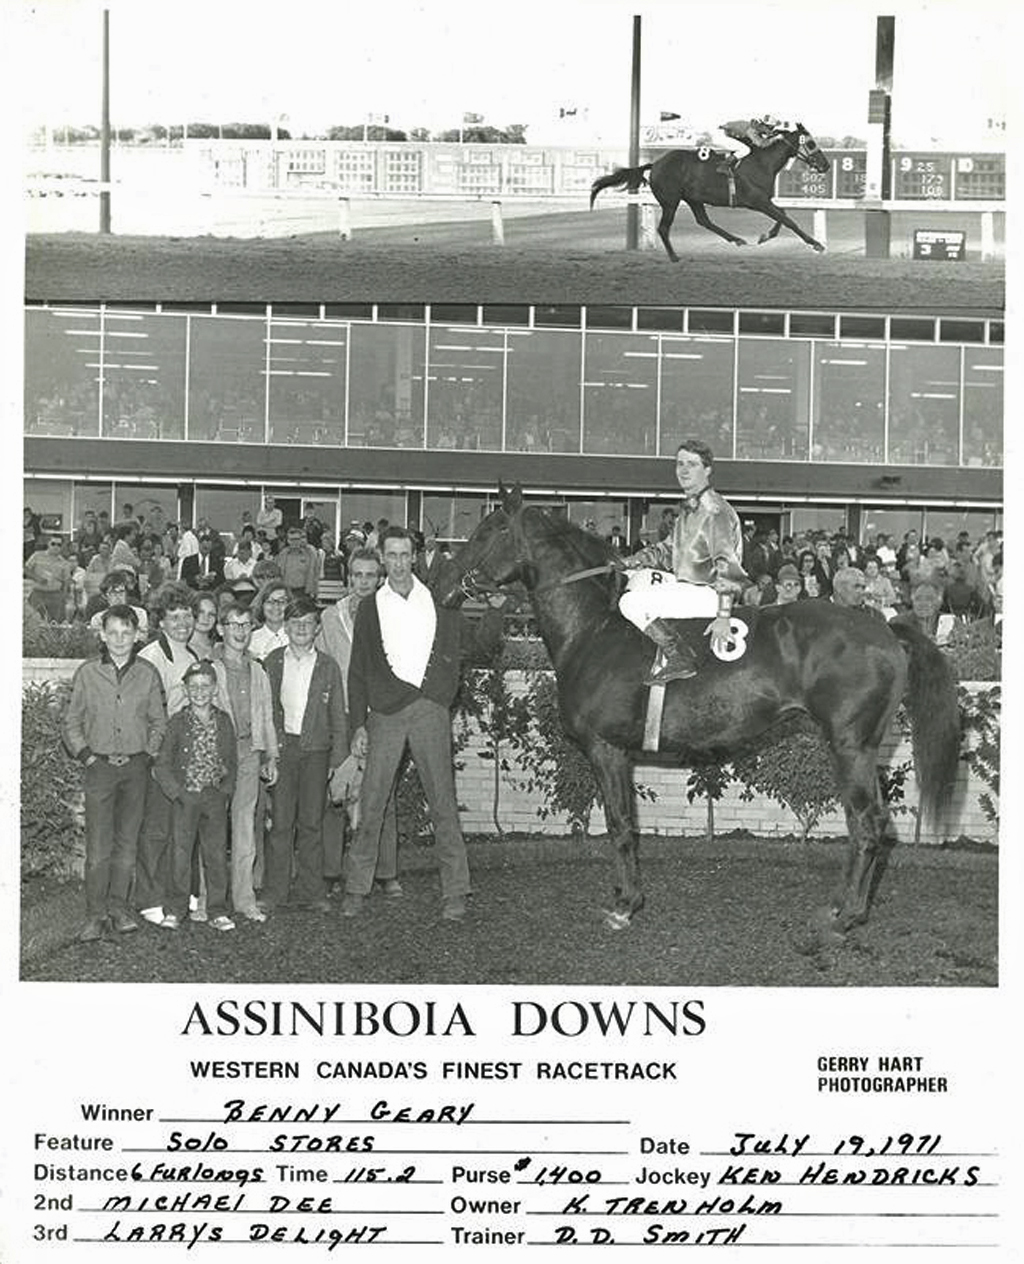 Keith Trenholm holding Benny Geary in the ASD winner's circle. July 19, 1971.